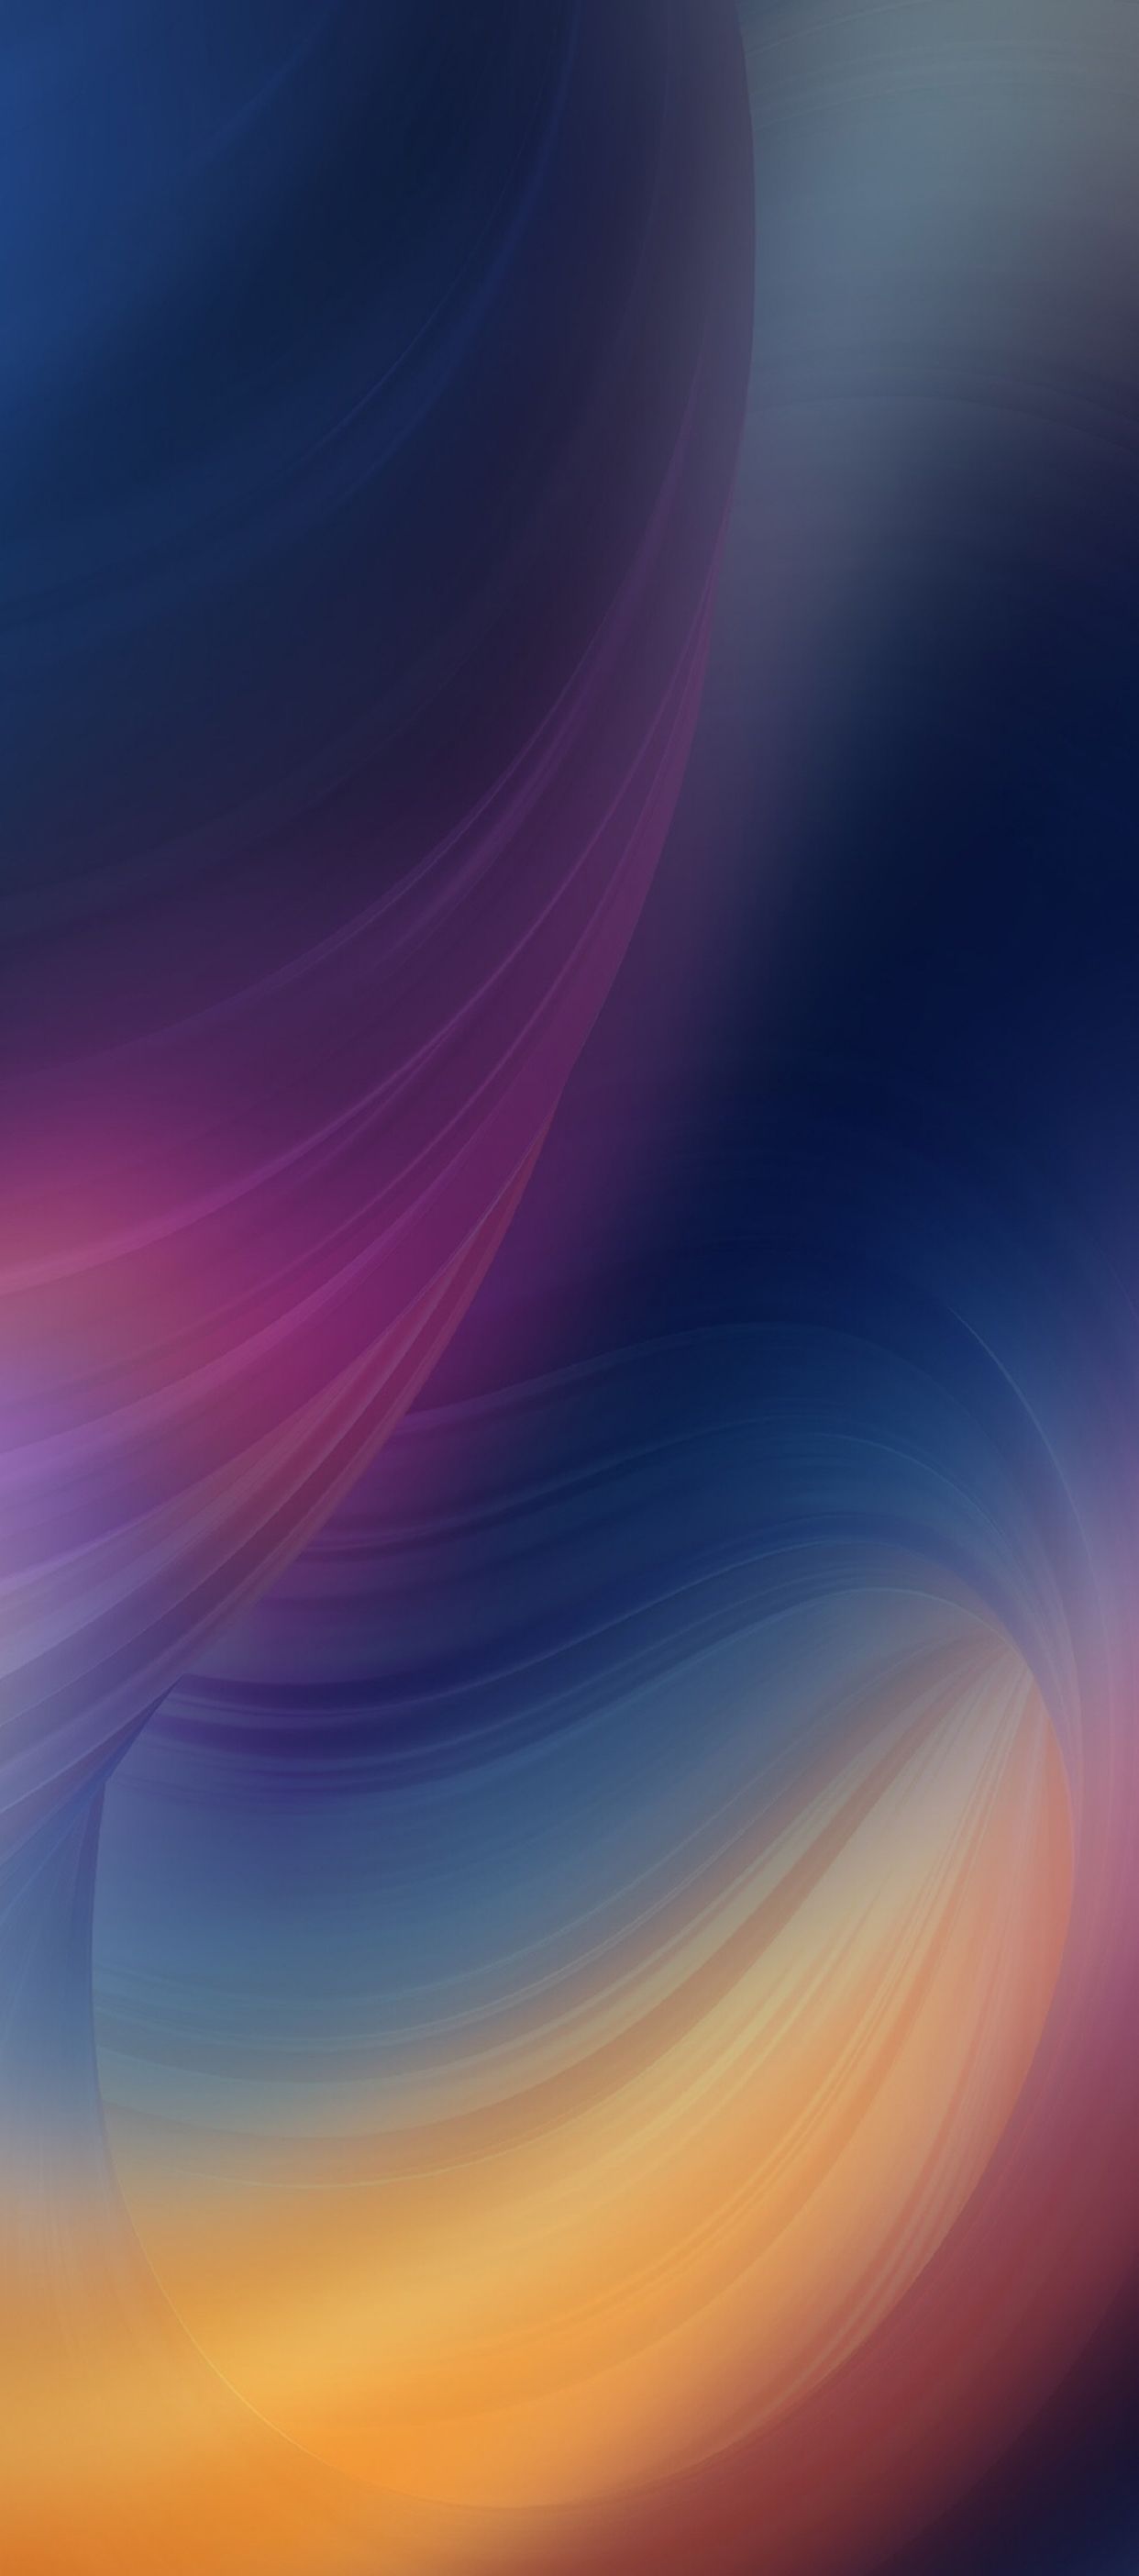 59+] iOS Backgrounds